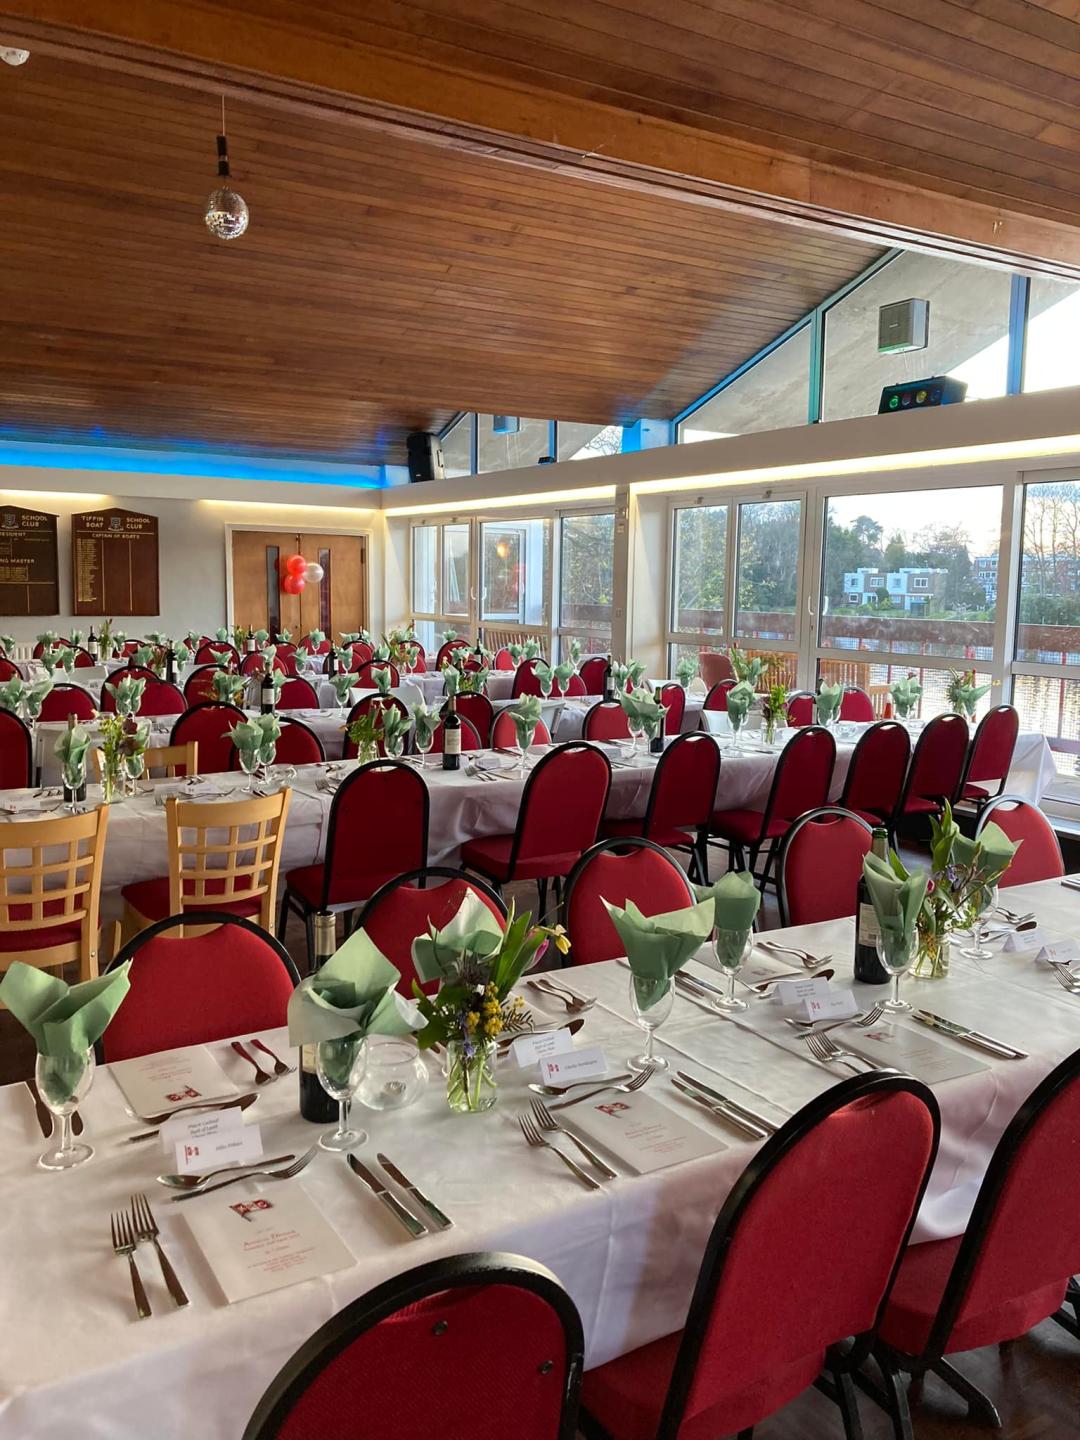 A large event space with long white tables and red chairs set out.